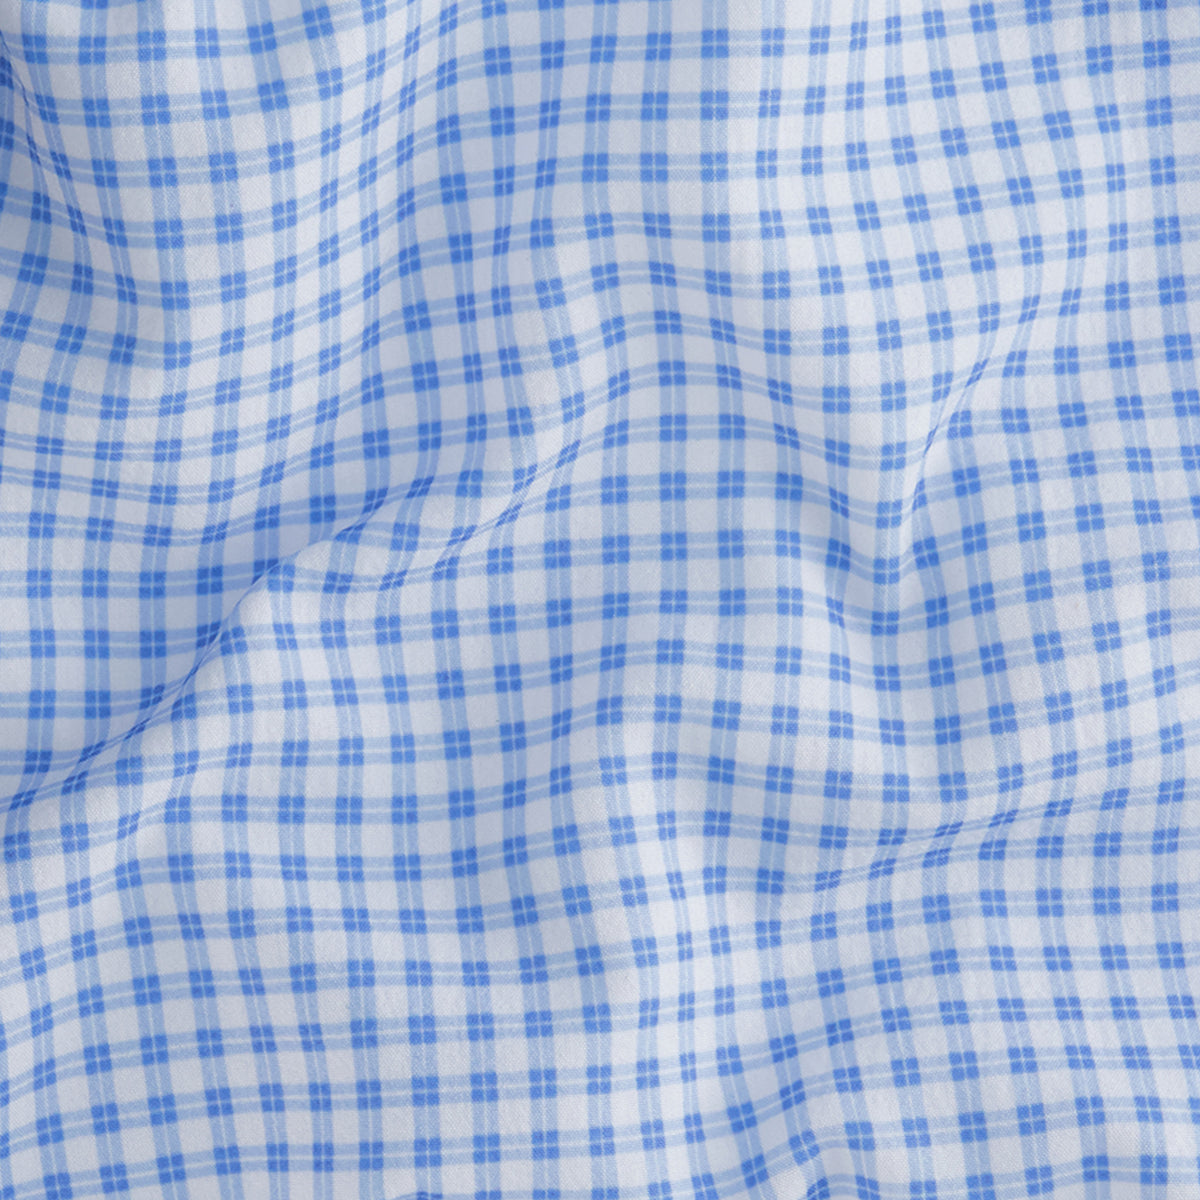 Material of Long Sleeve 4-Way Dress Shirt with Check Print in Blue